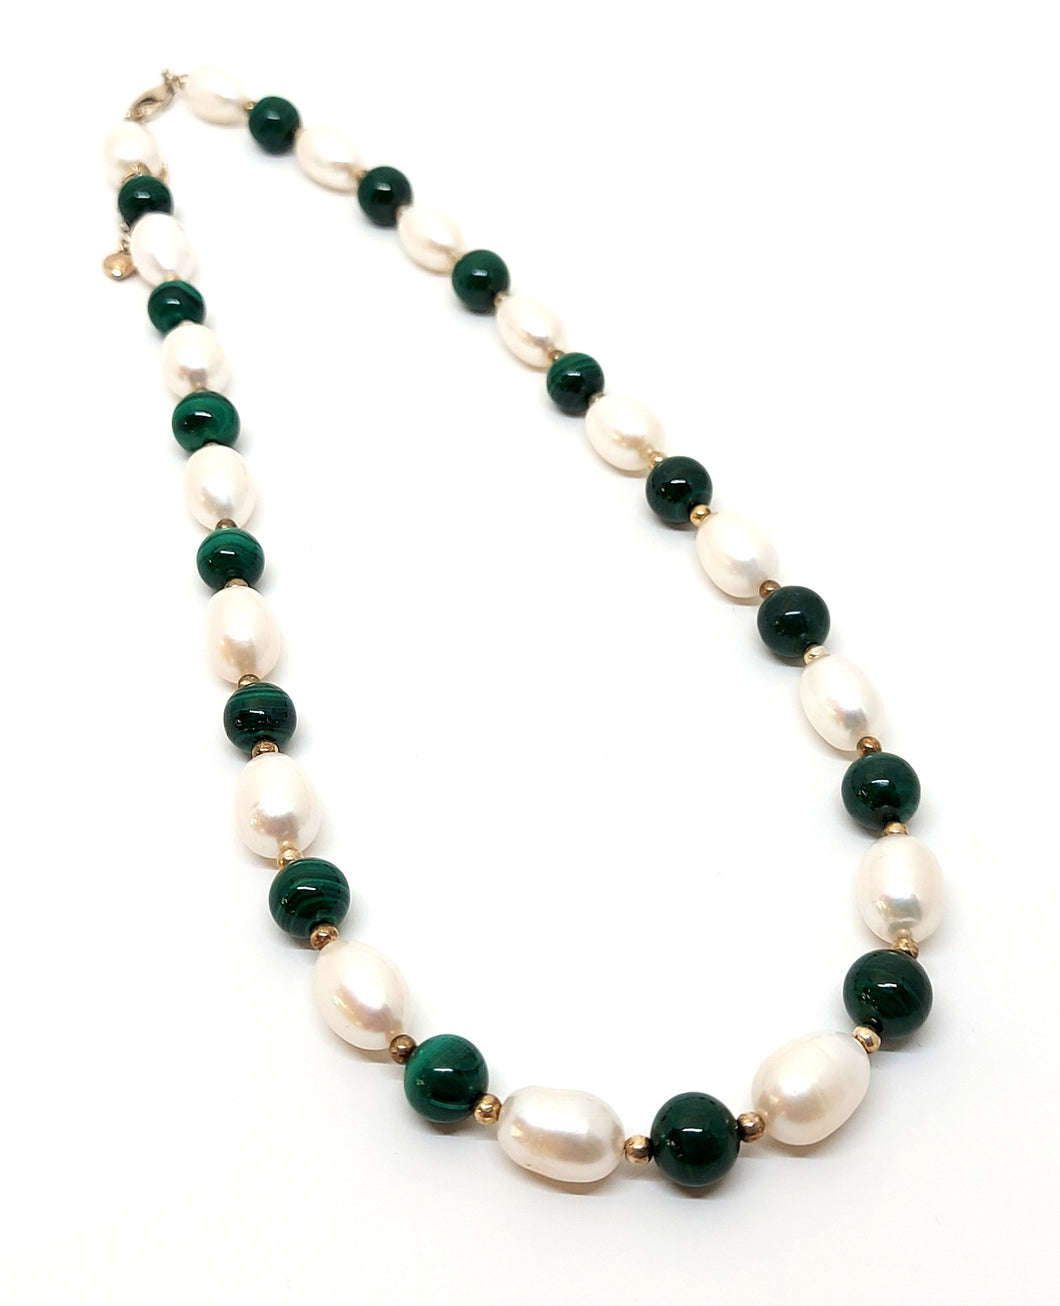 ByKila, Necklace with freshwater pearl and malachite, sterling silver (925)